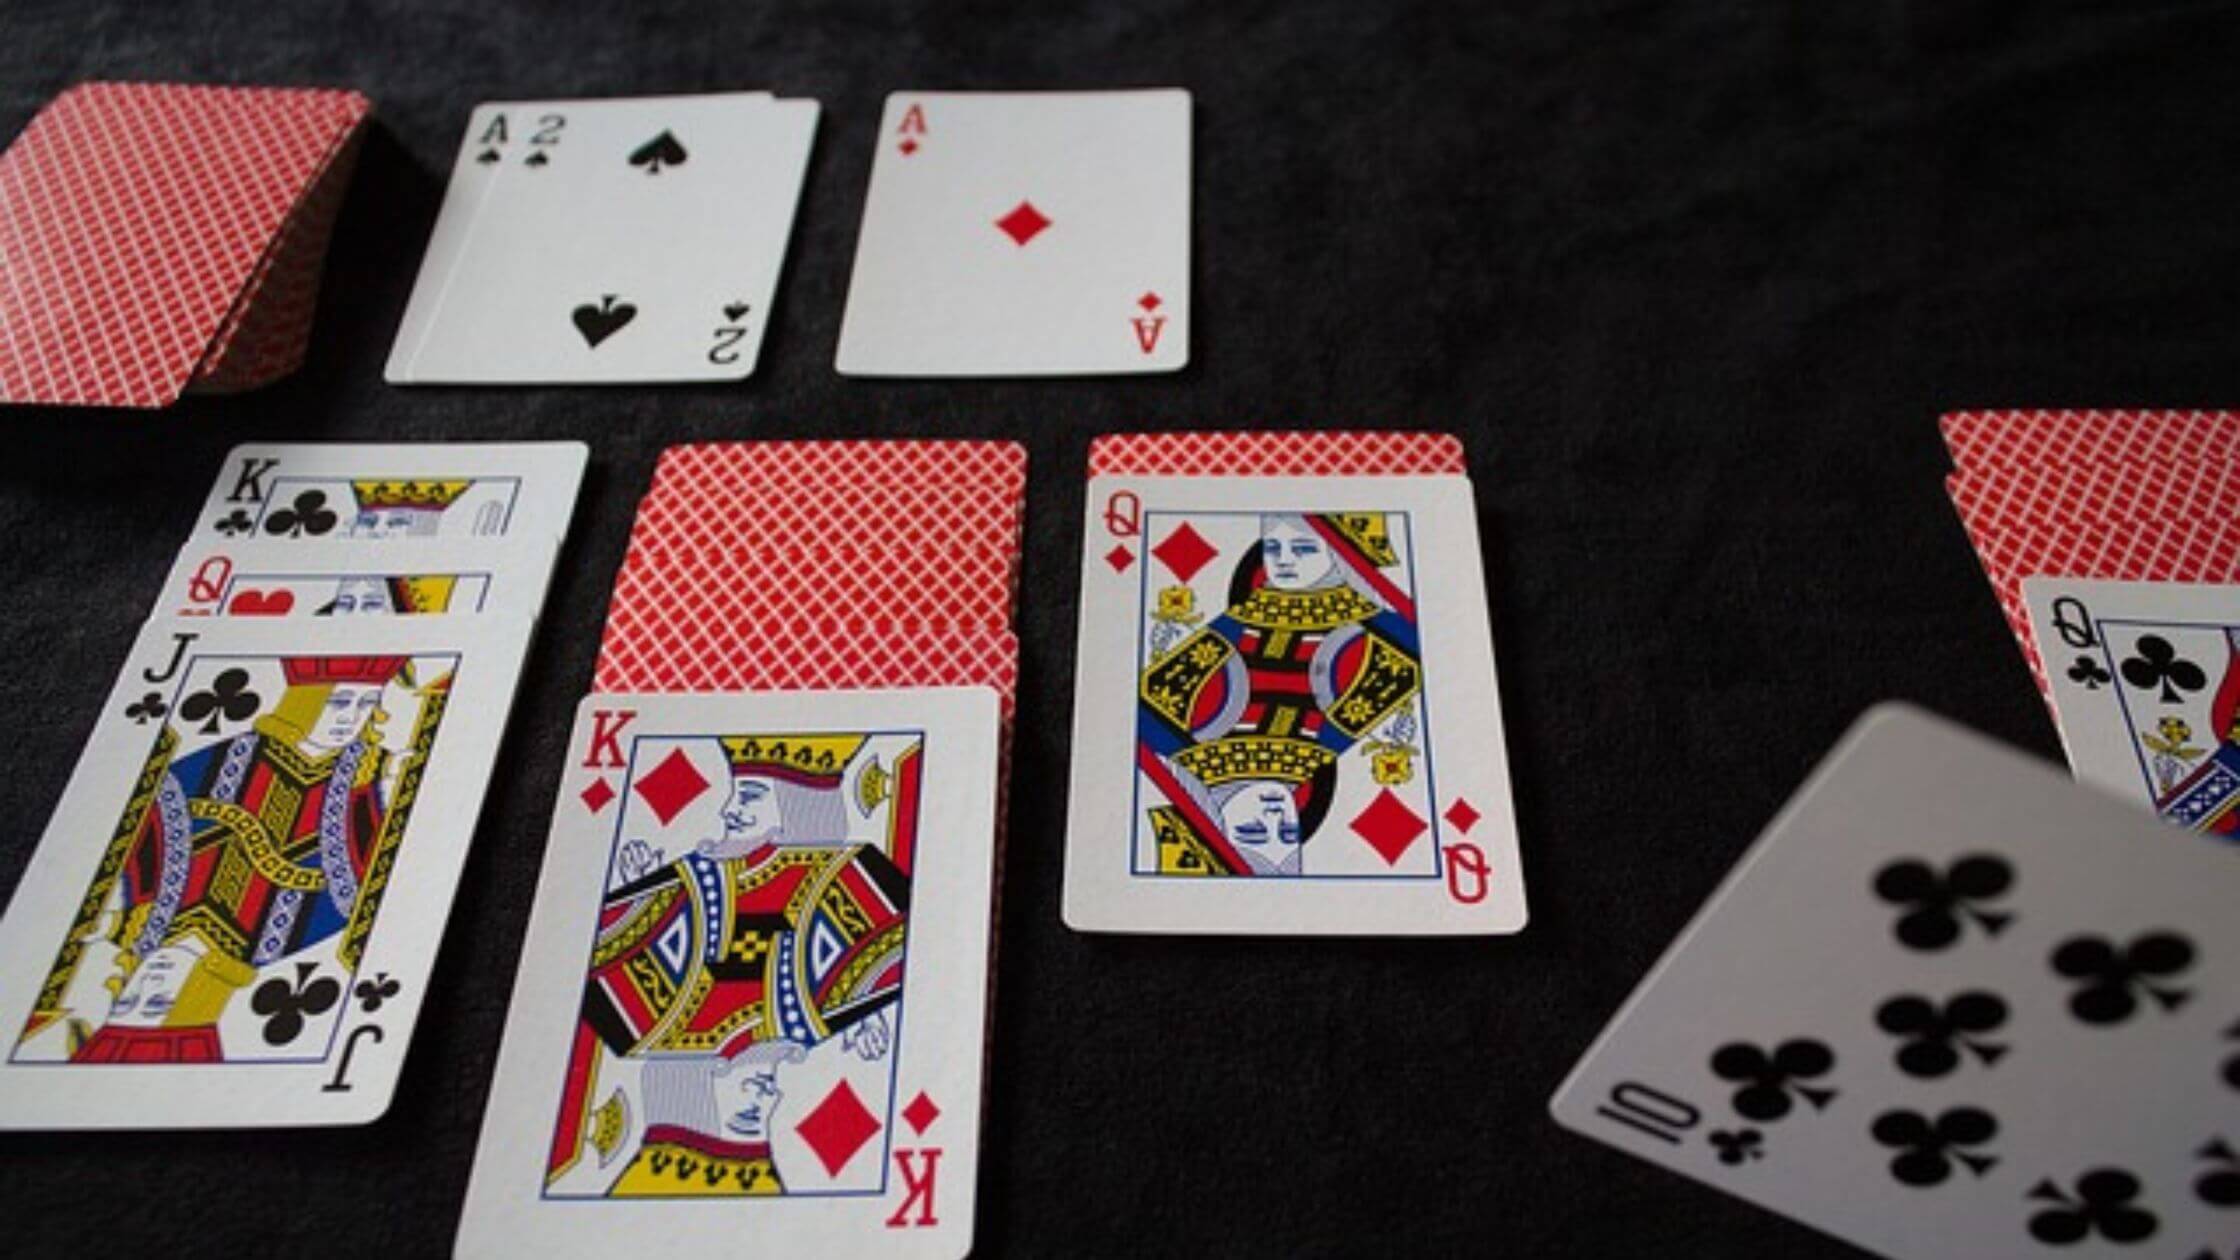 What Are The Differences Between Spider Solitaire And Klondike Solitaire